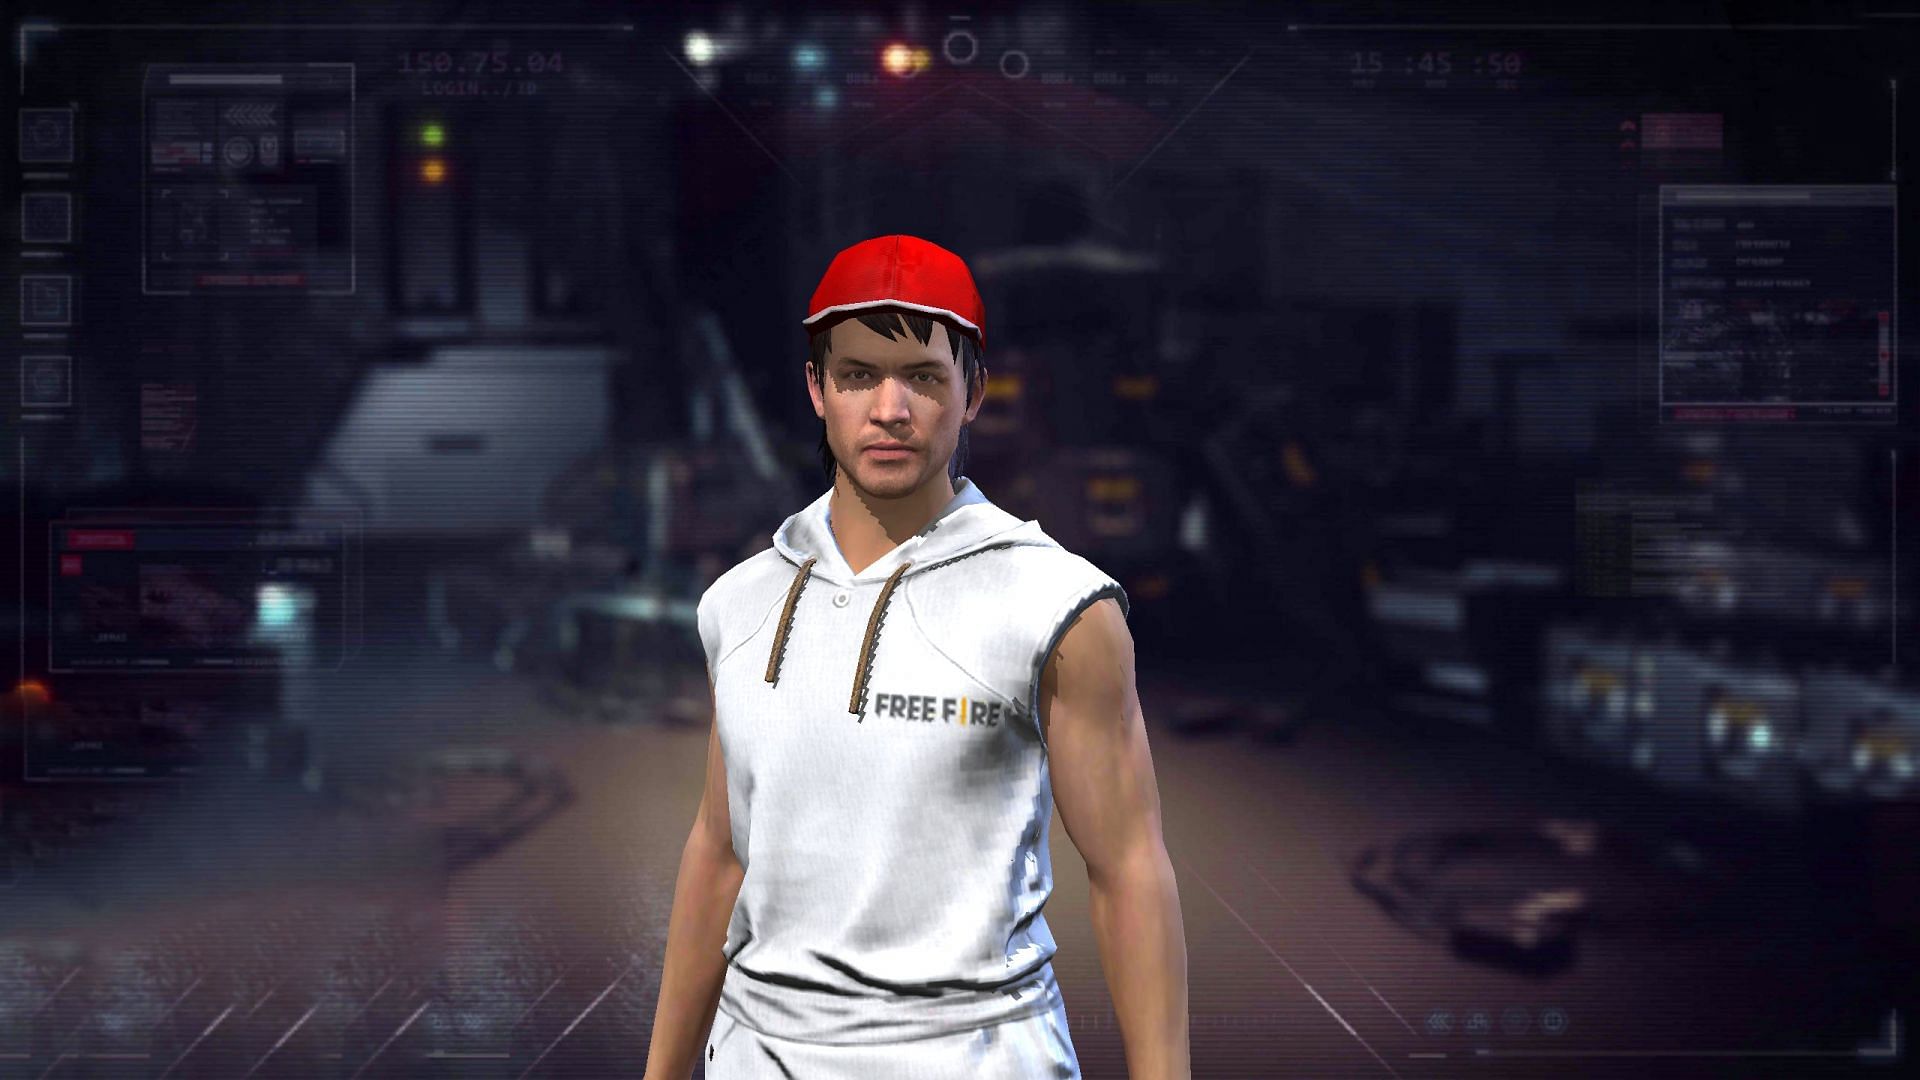 Red Baseball Cap is a reward for the latest Free Fire redeem code (Image via Garena)